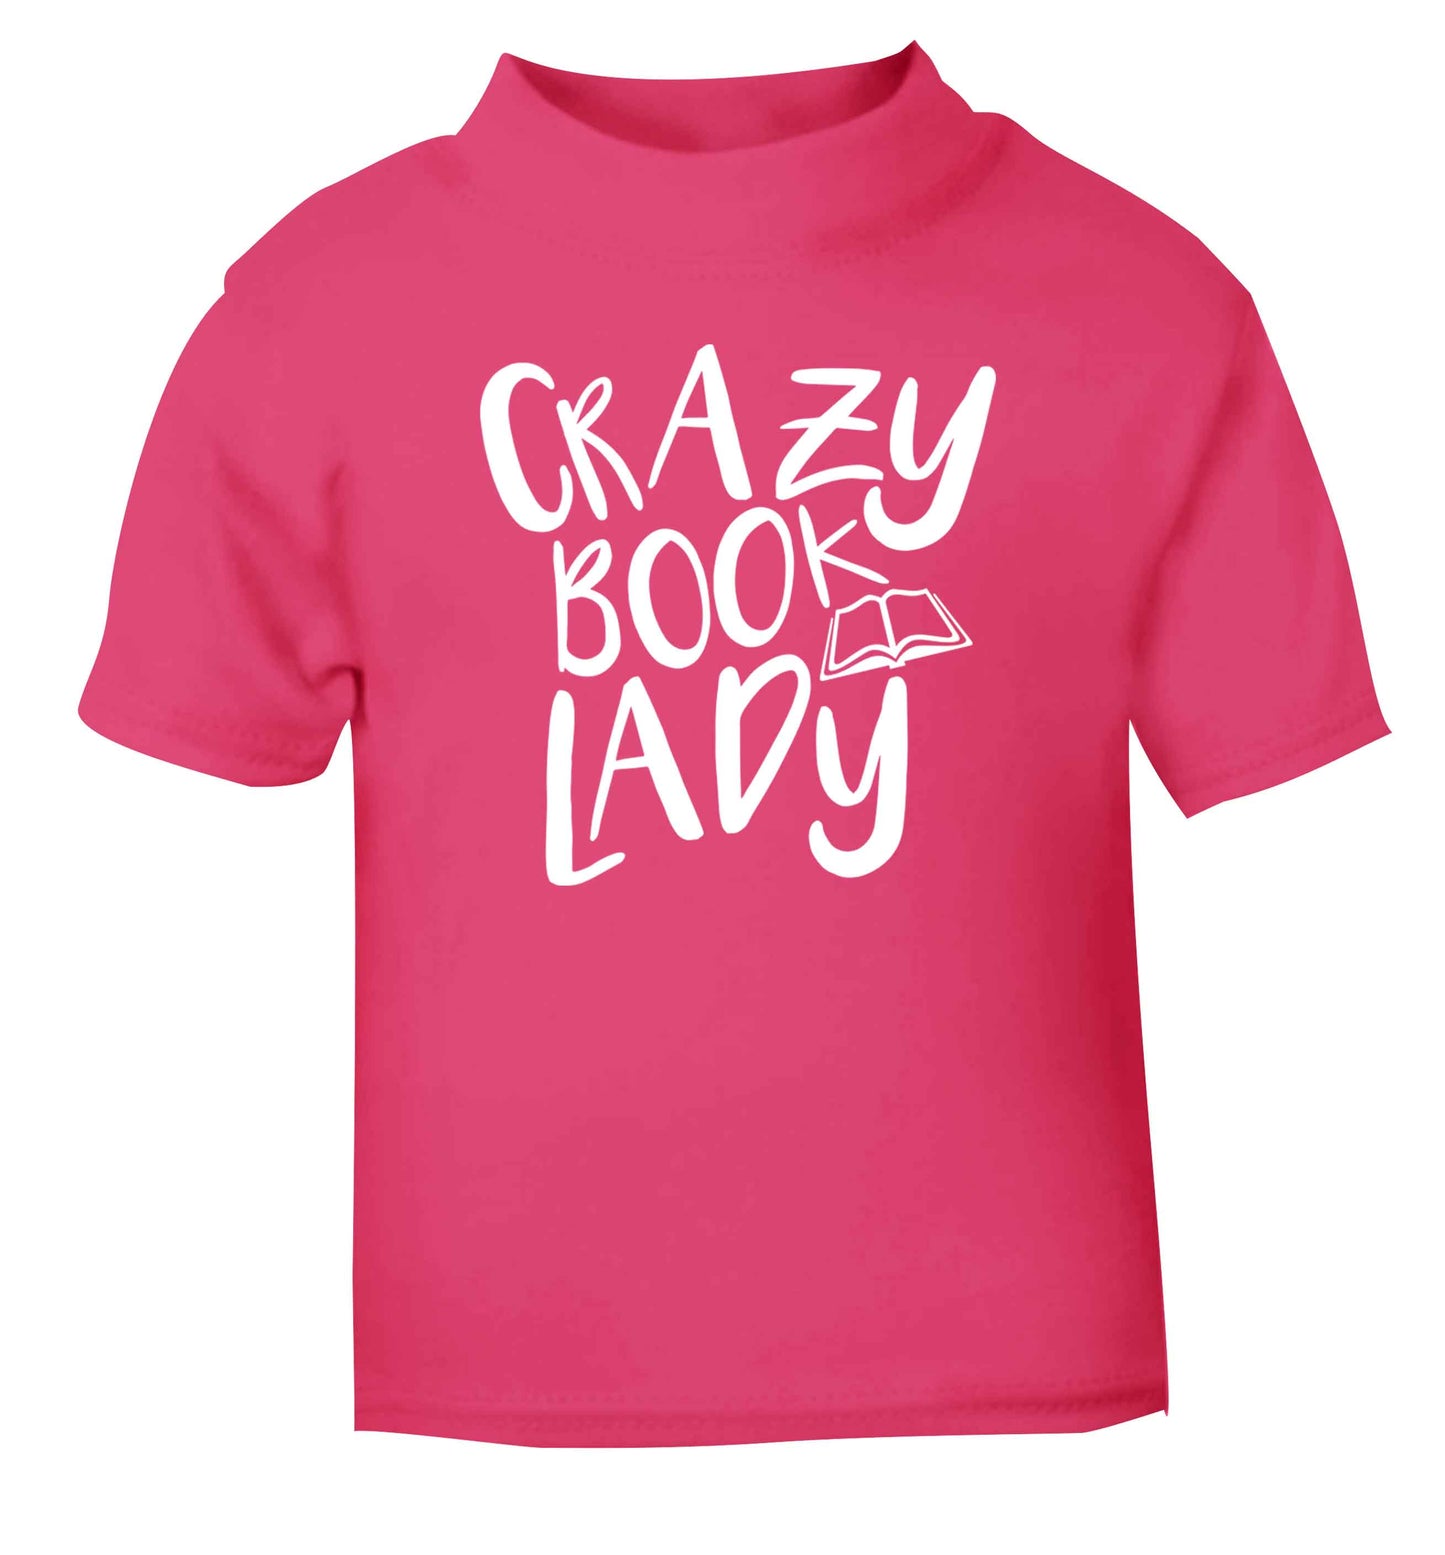 Crazy book lady pink Baby Toddler Tshirt 2 Years